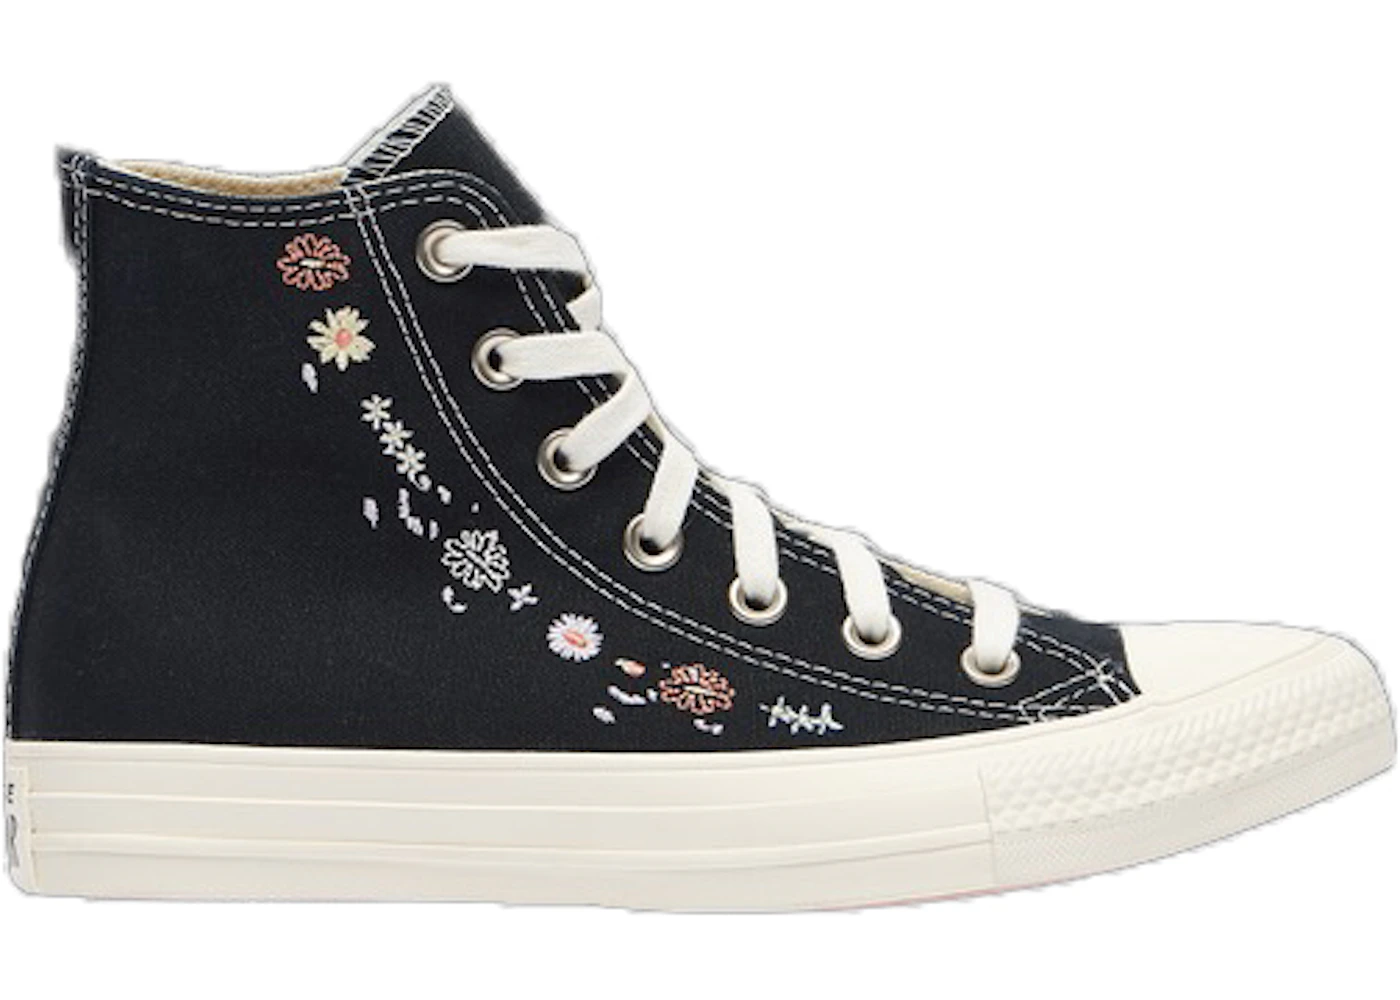 Converse Chuck Taylor All-Star Lift Hi Black Floral Embroidery (Women's) -  A01592C - US